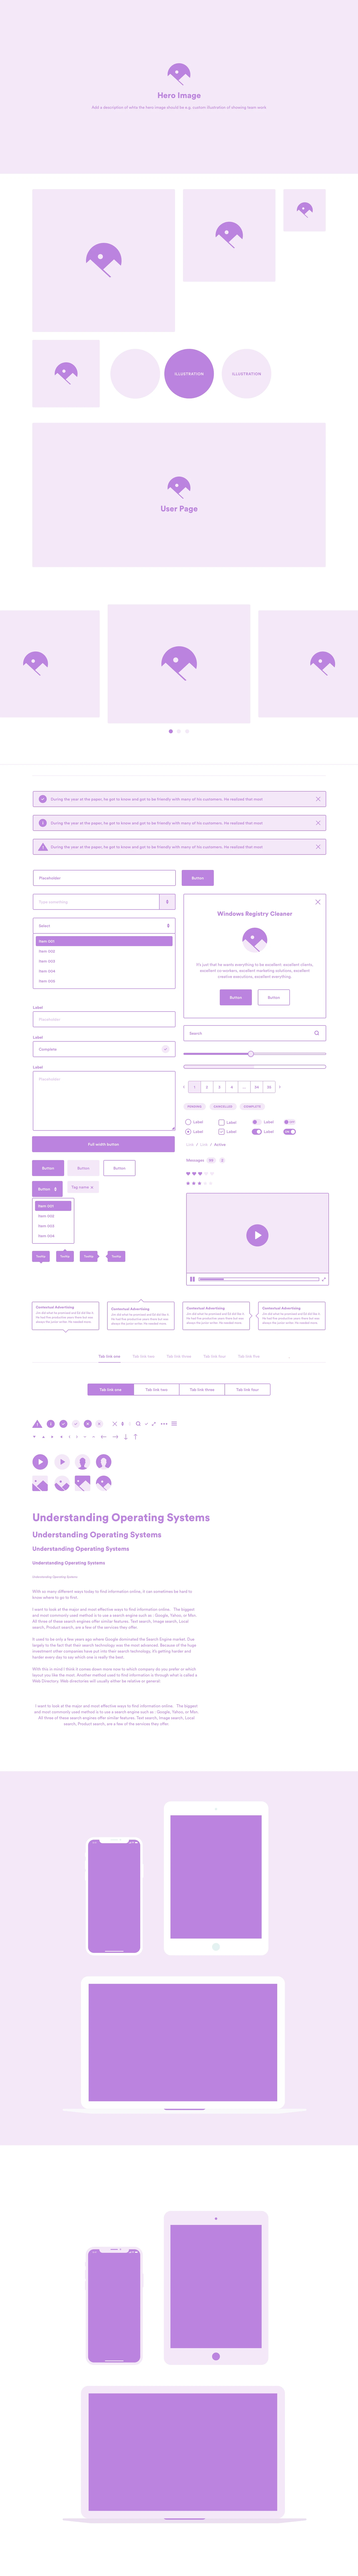 Website Wireframe Kit - Minimal and clean Wireframe Kit design by Jose Bento